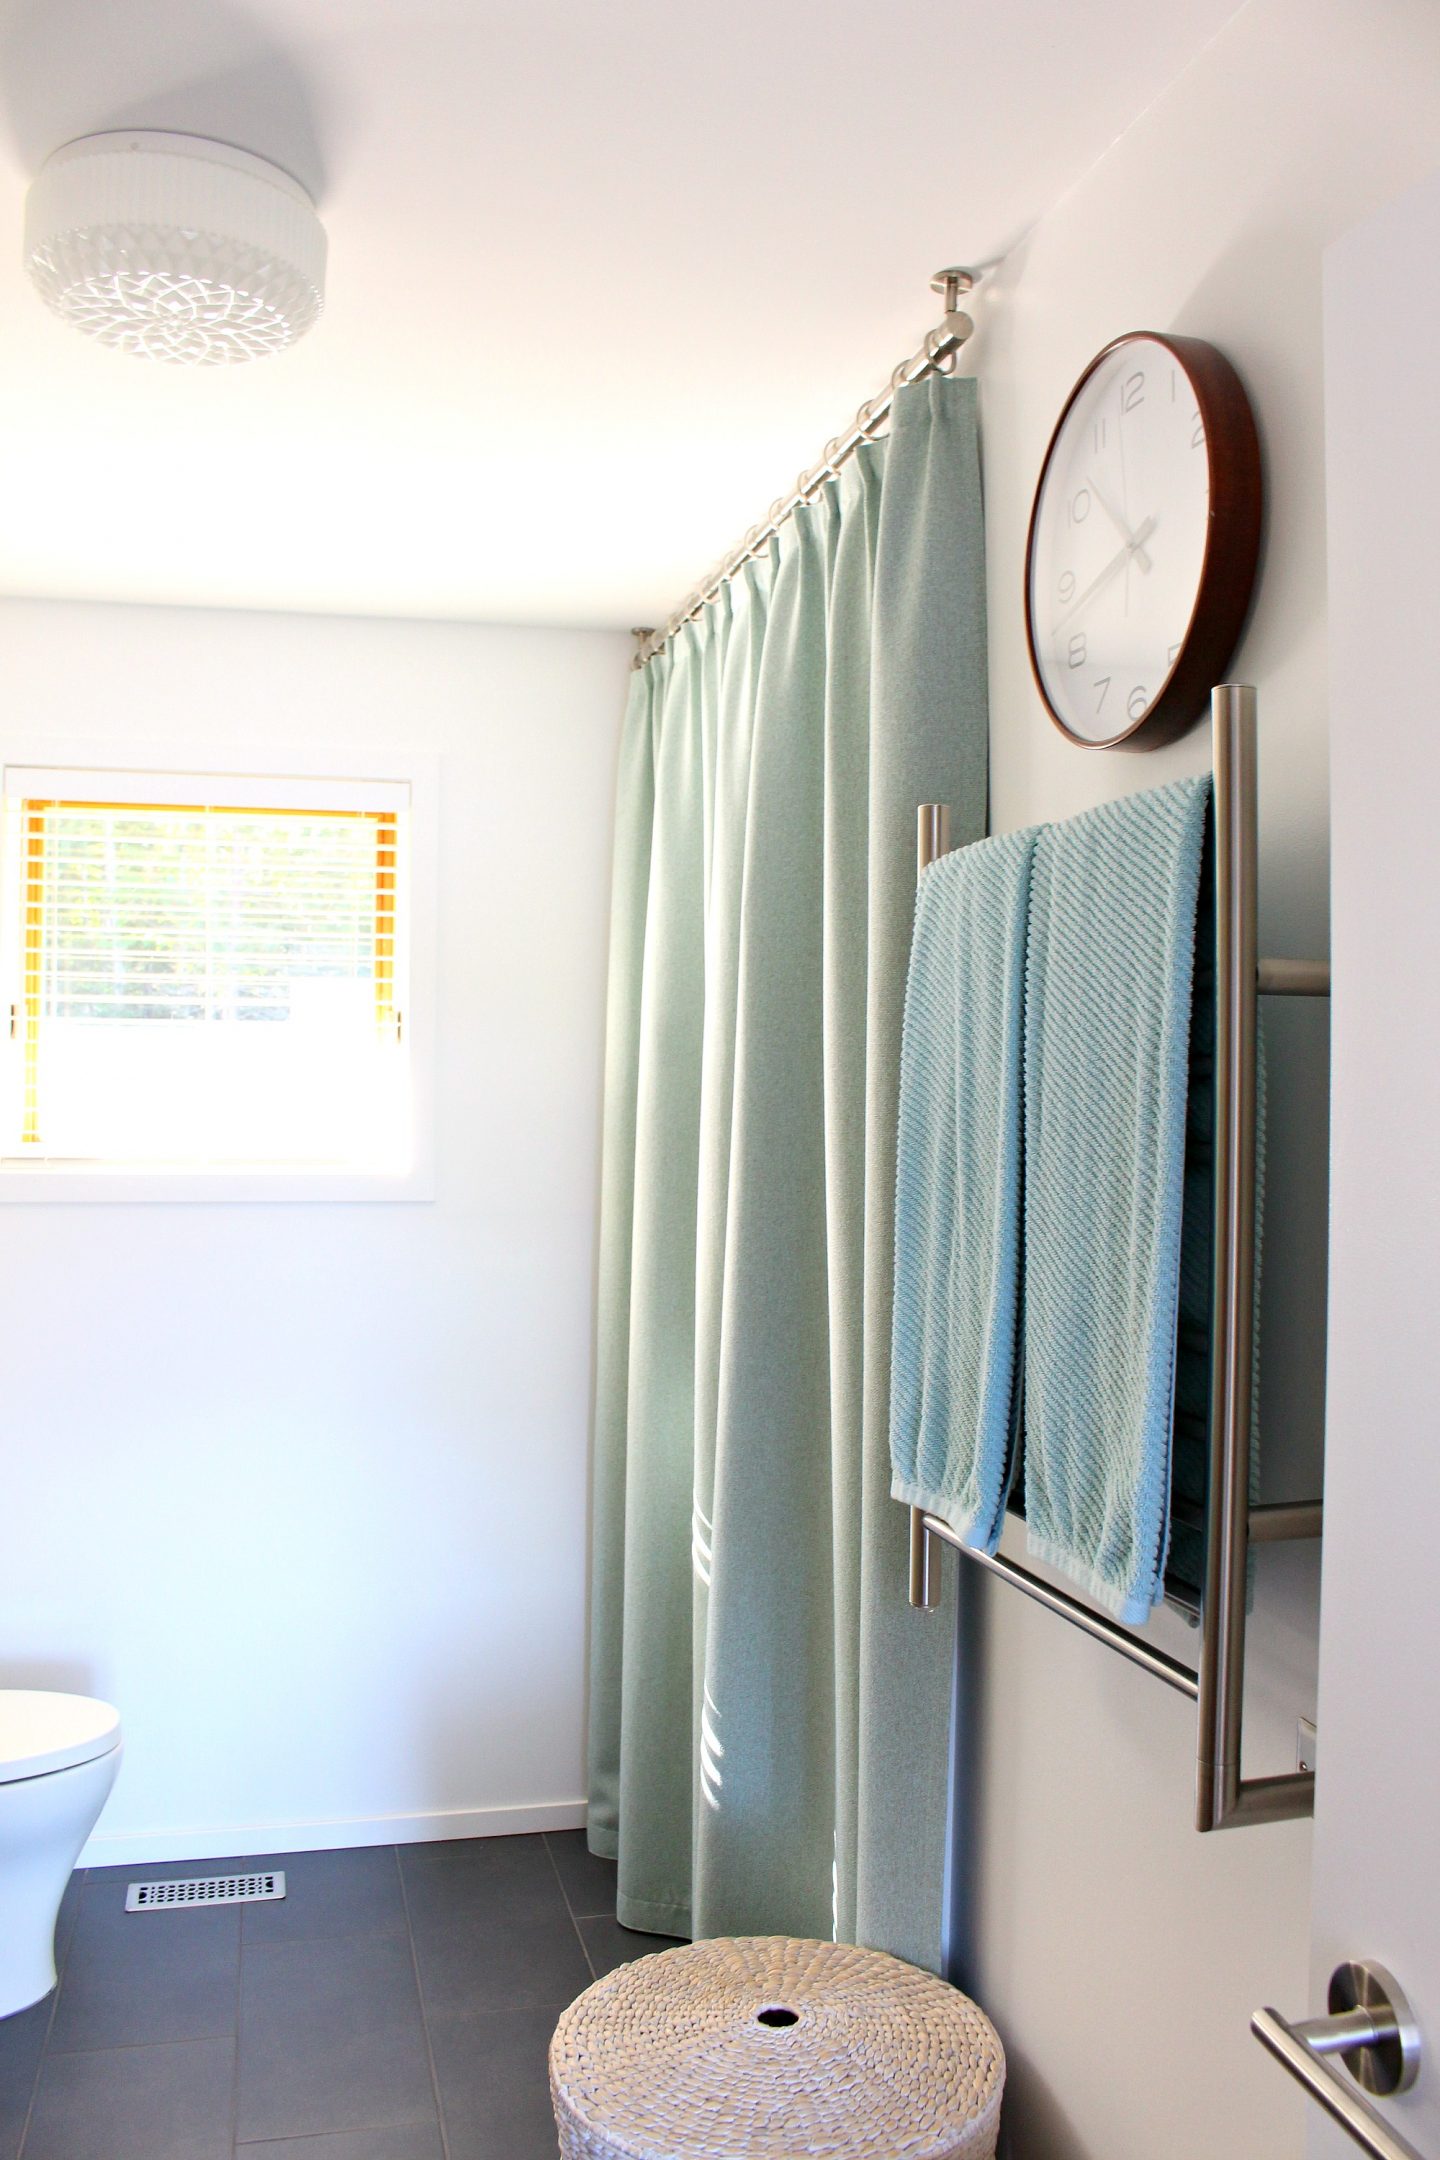 Ceiling Mounted Shower Curtain Rod With